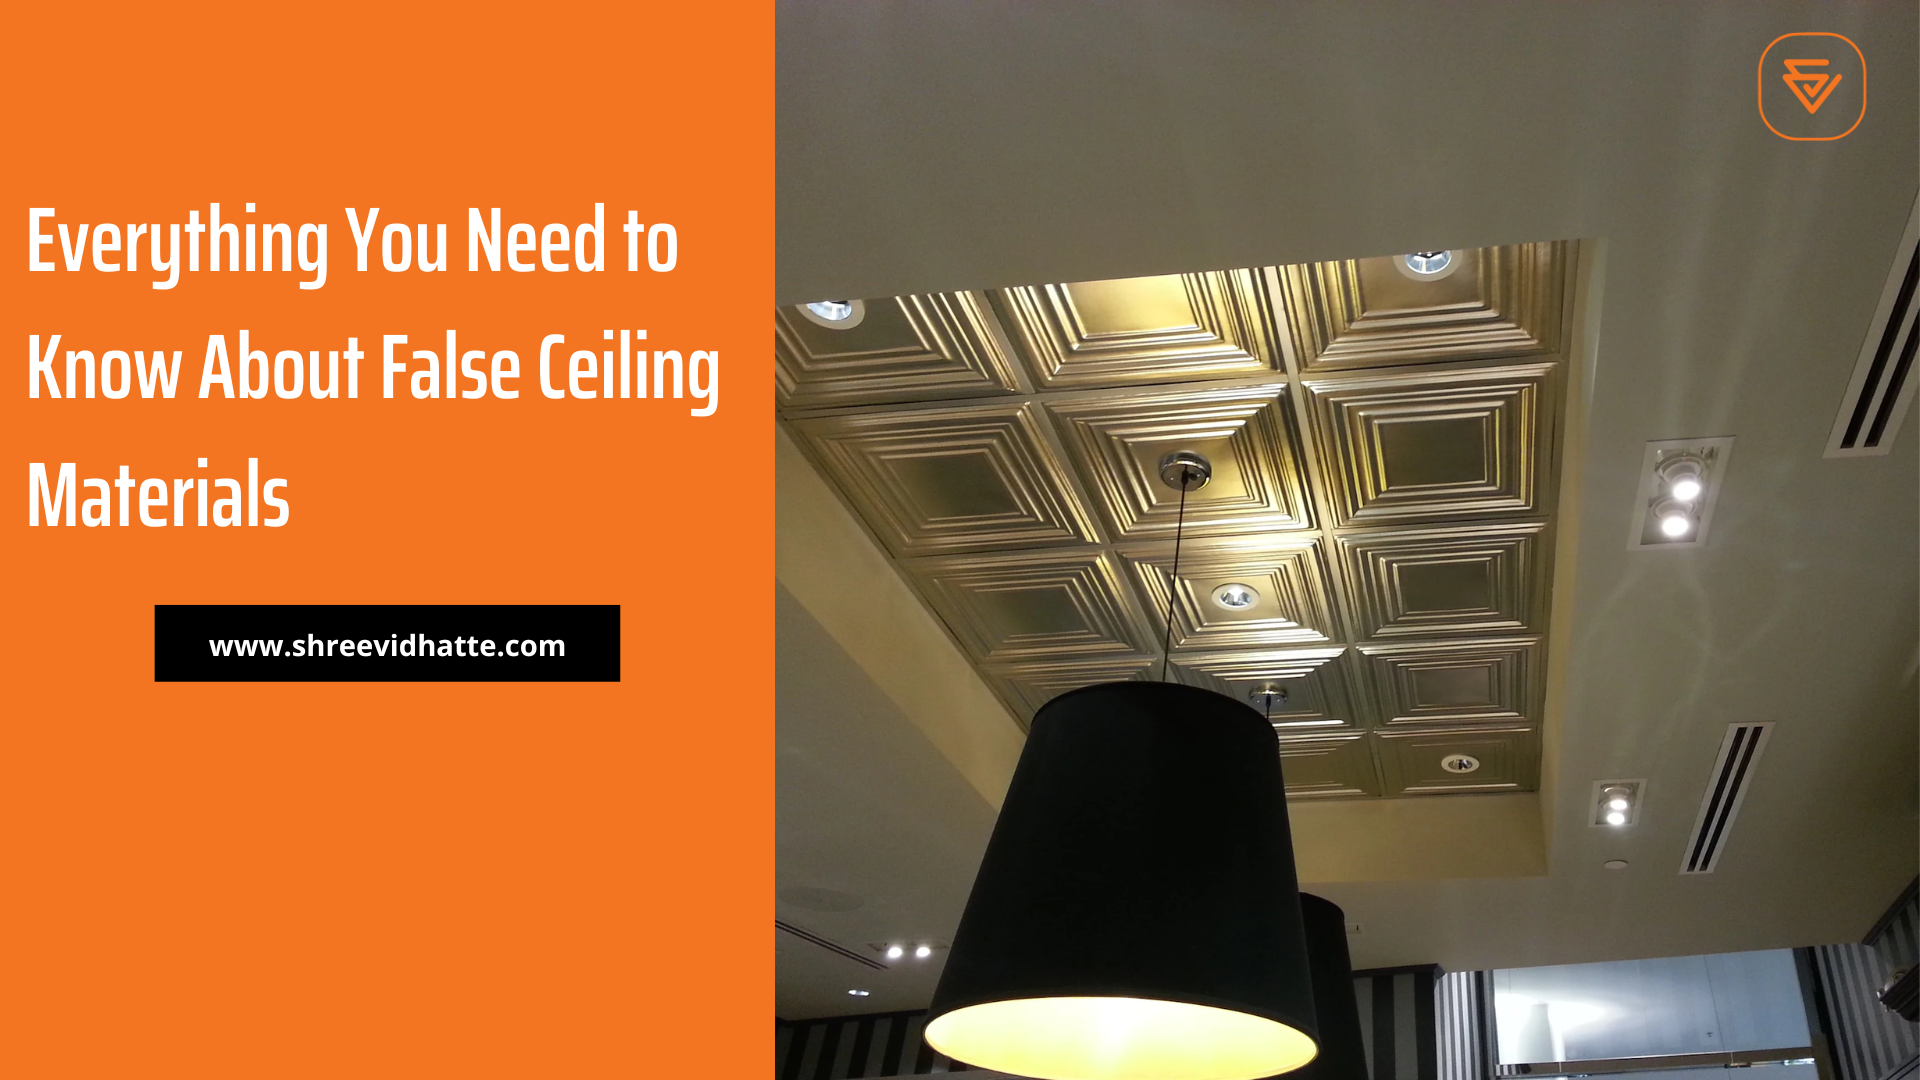 https://www.shreevidhatte.com/2023/07/02/everything-you-need-to-know-about-false-ceiling-materials/